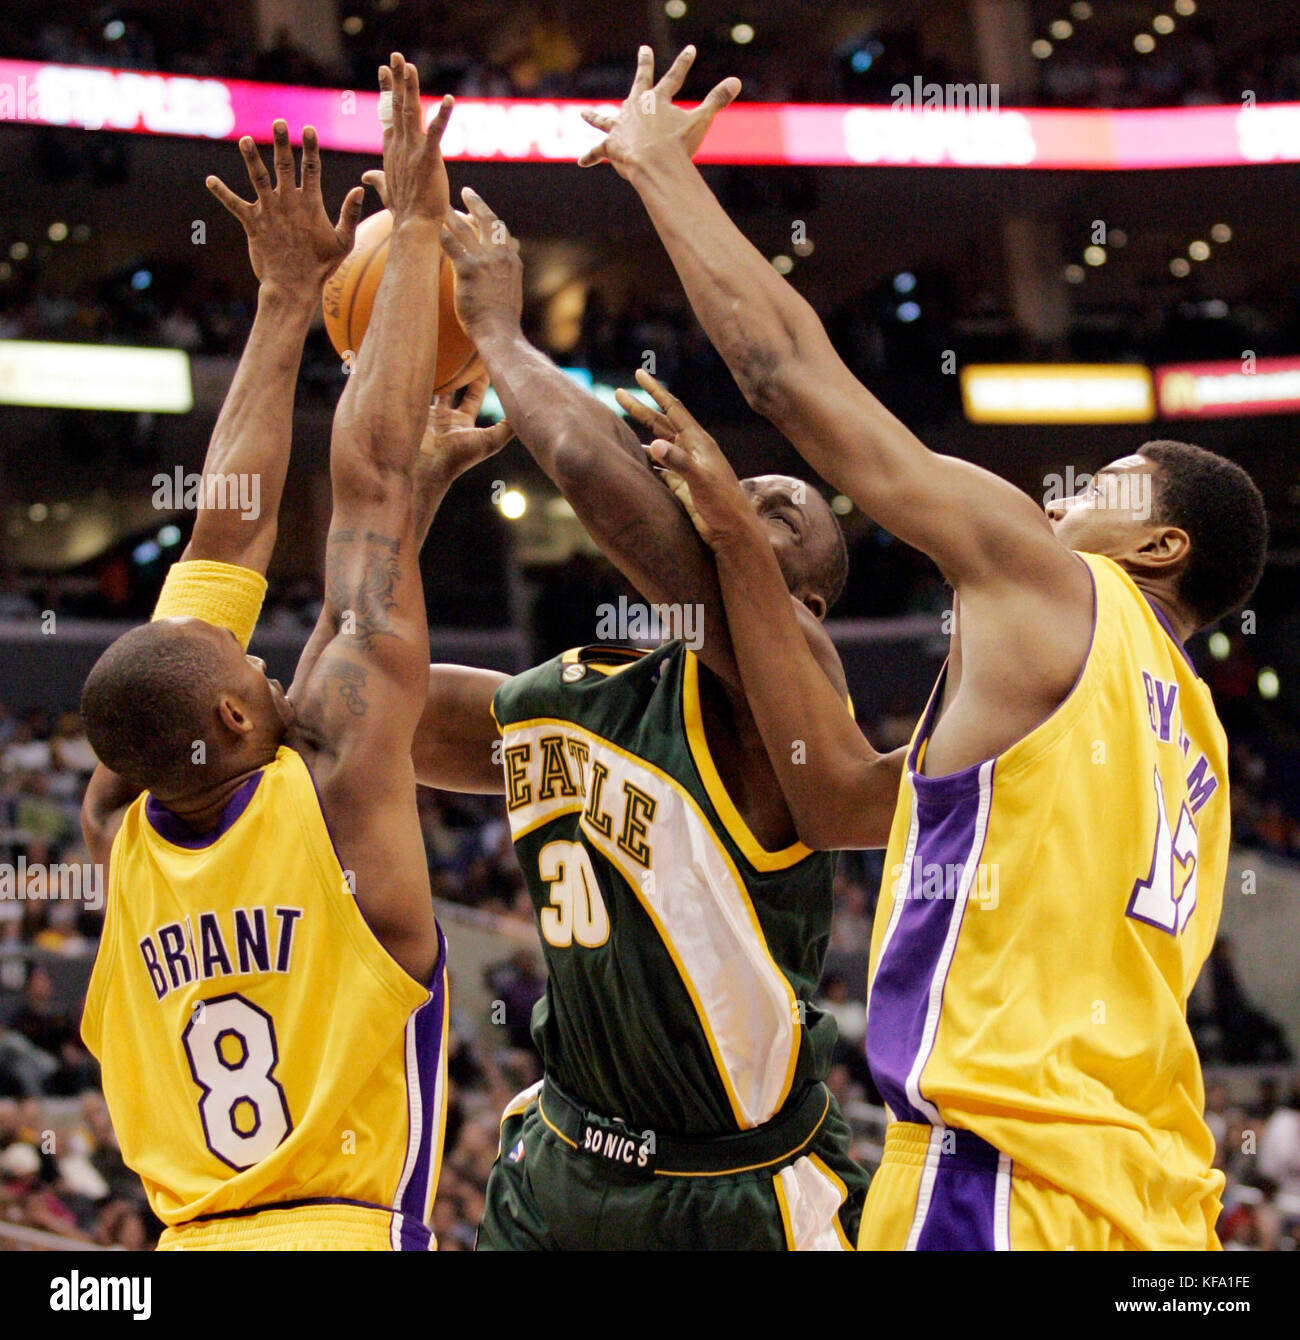 Los Angeles Lakers' Kobe Bryant, left, and teammate Lamar Bynum, right, stop the progress of Seattle Supersonics' Reggie Evans as he drove to the basket in the first half in Los Angeles on Thursday, Nov. 24, 2005. Bynum was called for a foul. Photo by Francis Specker Stock Photo